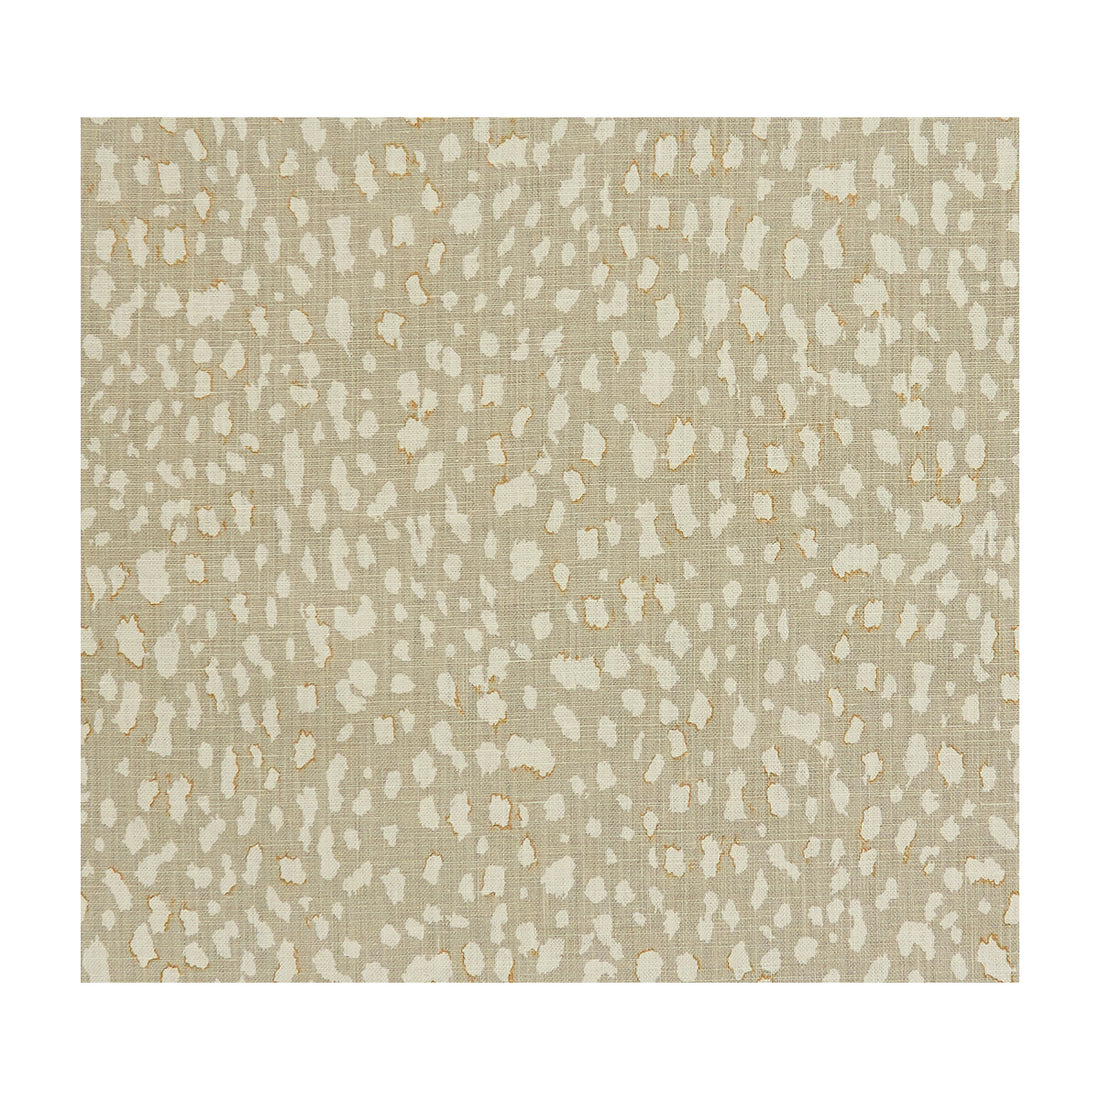 Lynx Dot fabric in oyster color - pattern LYNX DOT.1611.0 - by Kravet Couture in the Jan Showers Glamorous collection